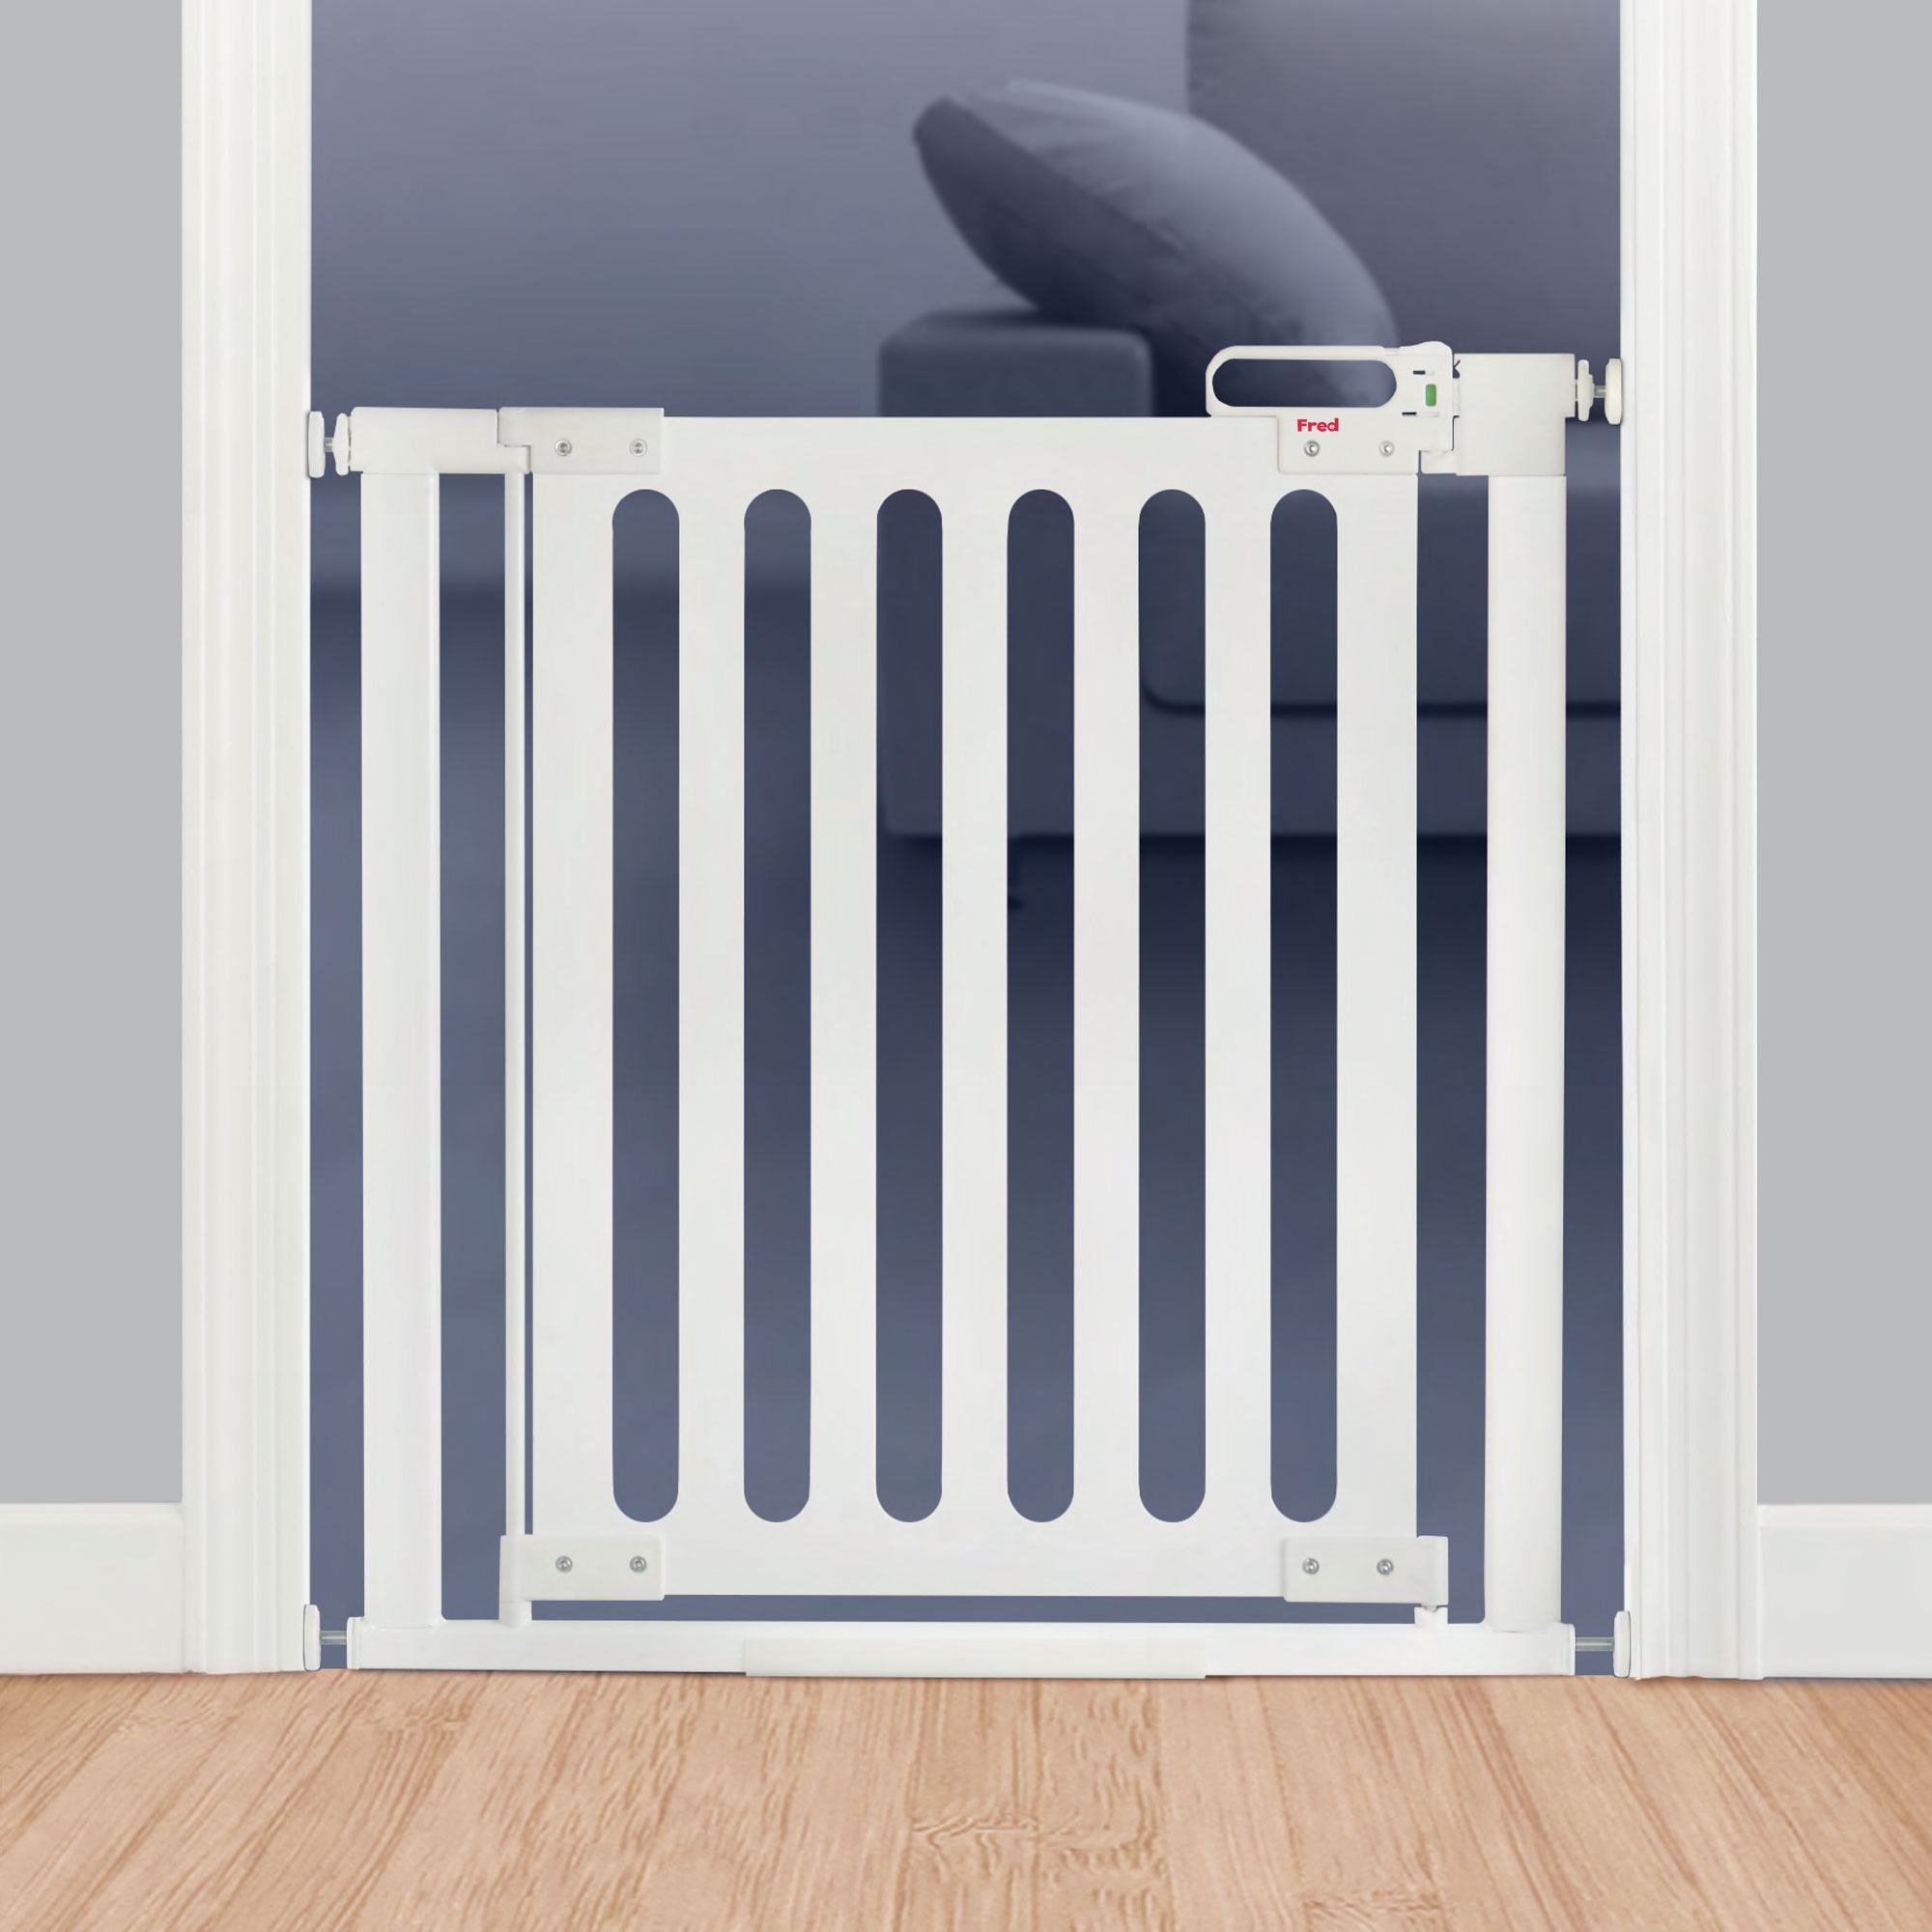 fred stair gate